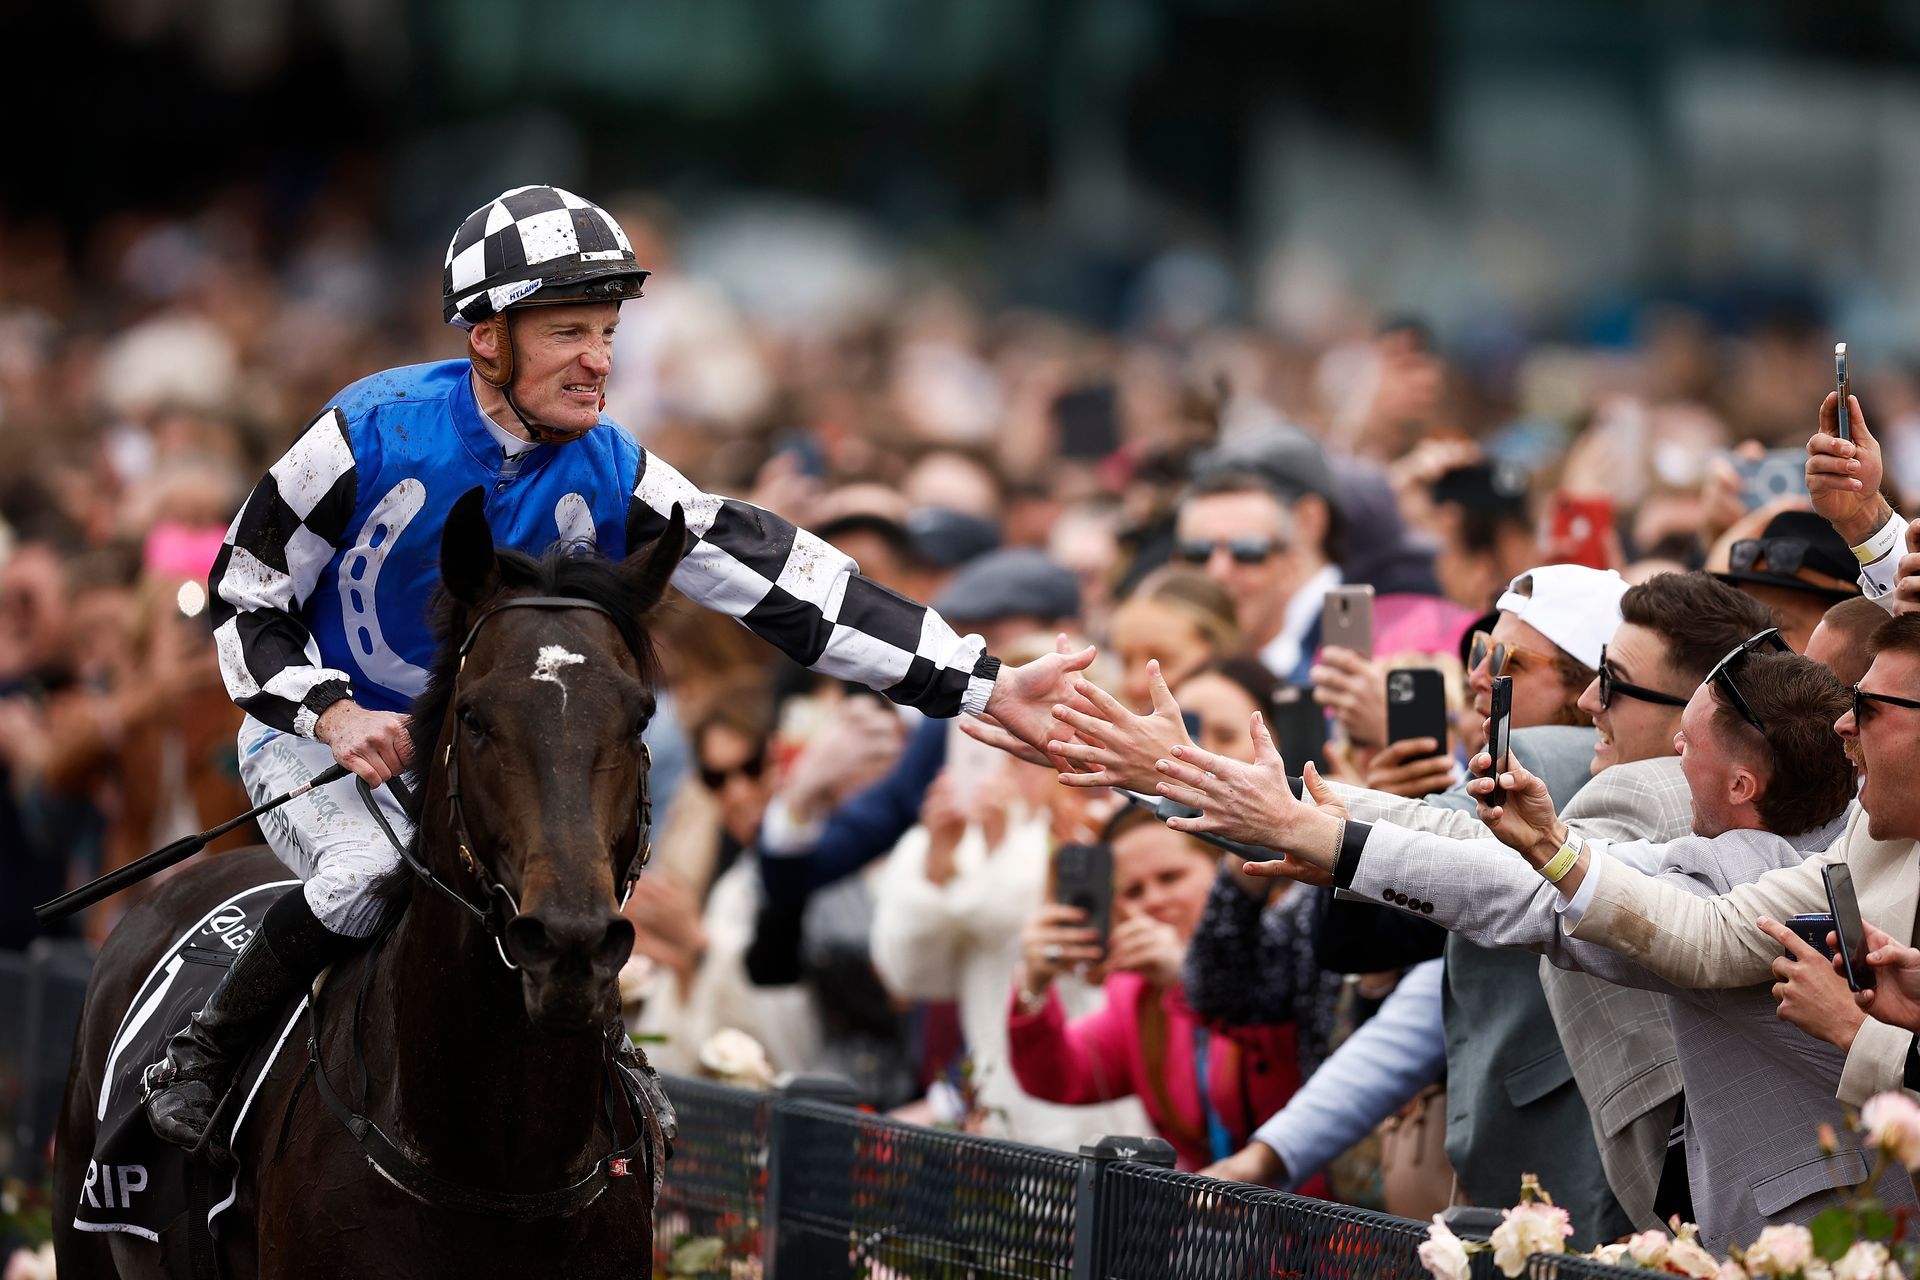 HBA Media | a jockey is riding a horse in front of a crowd of people .